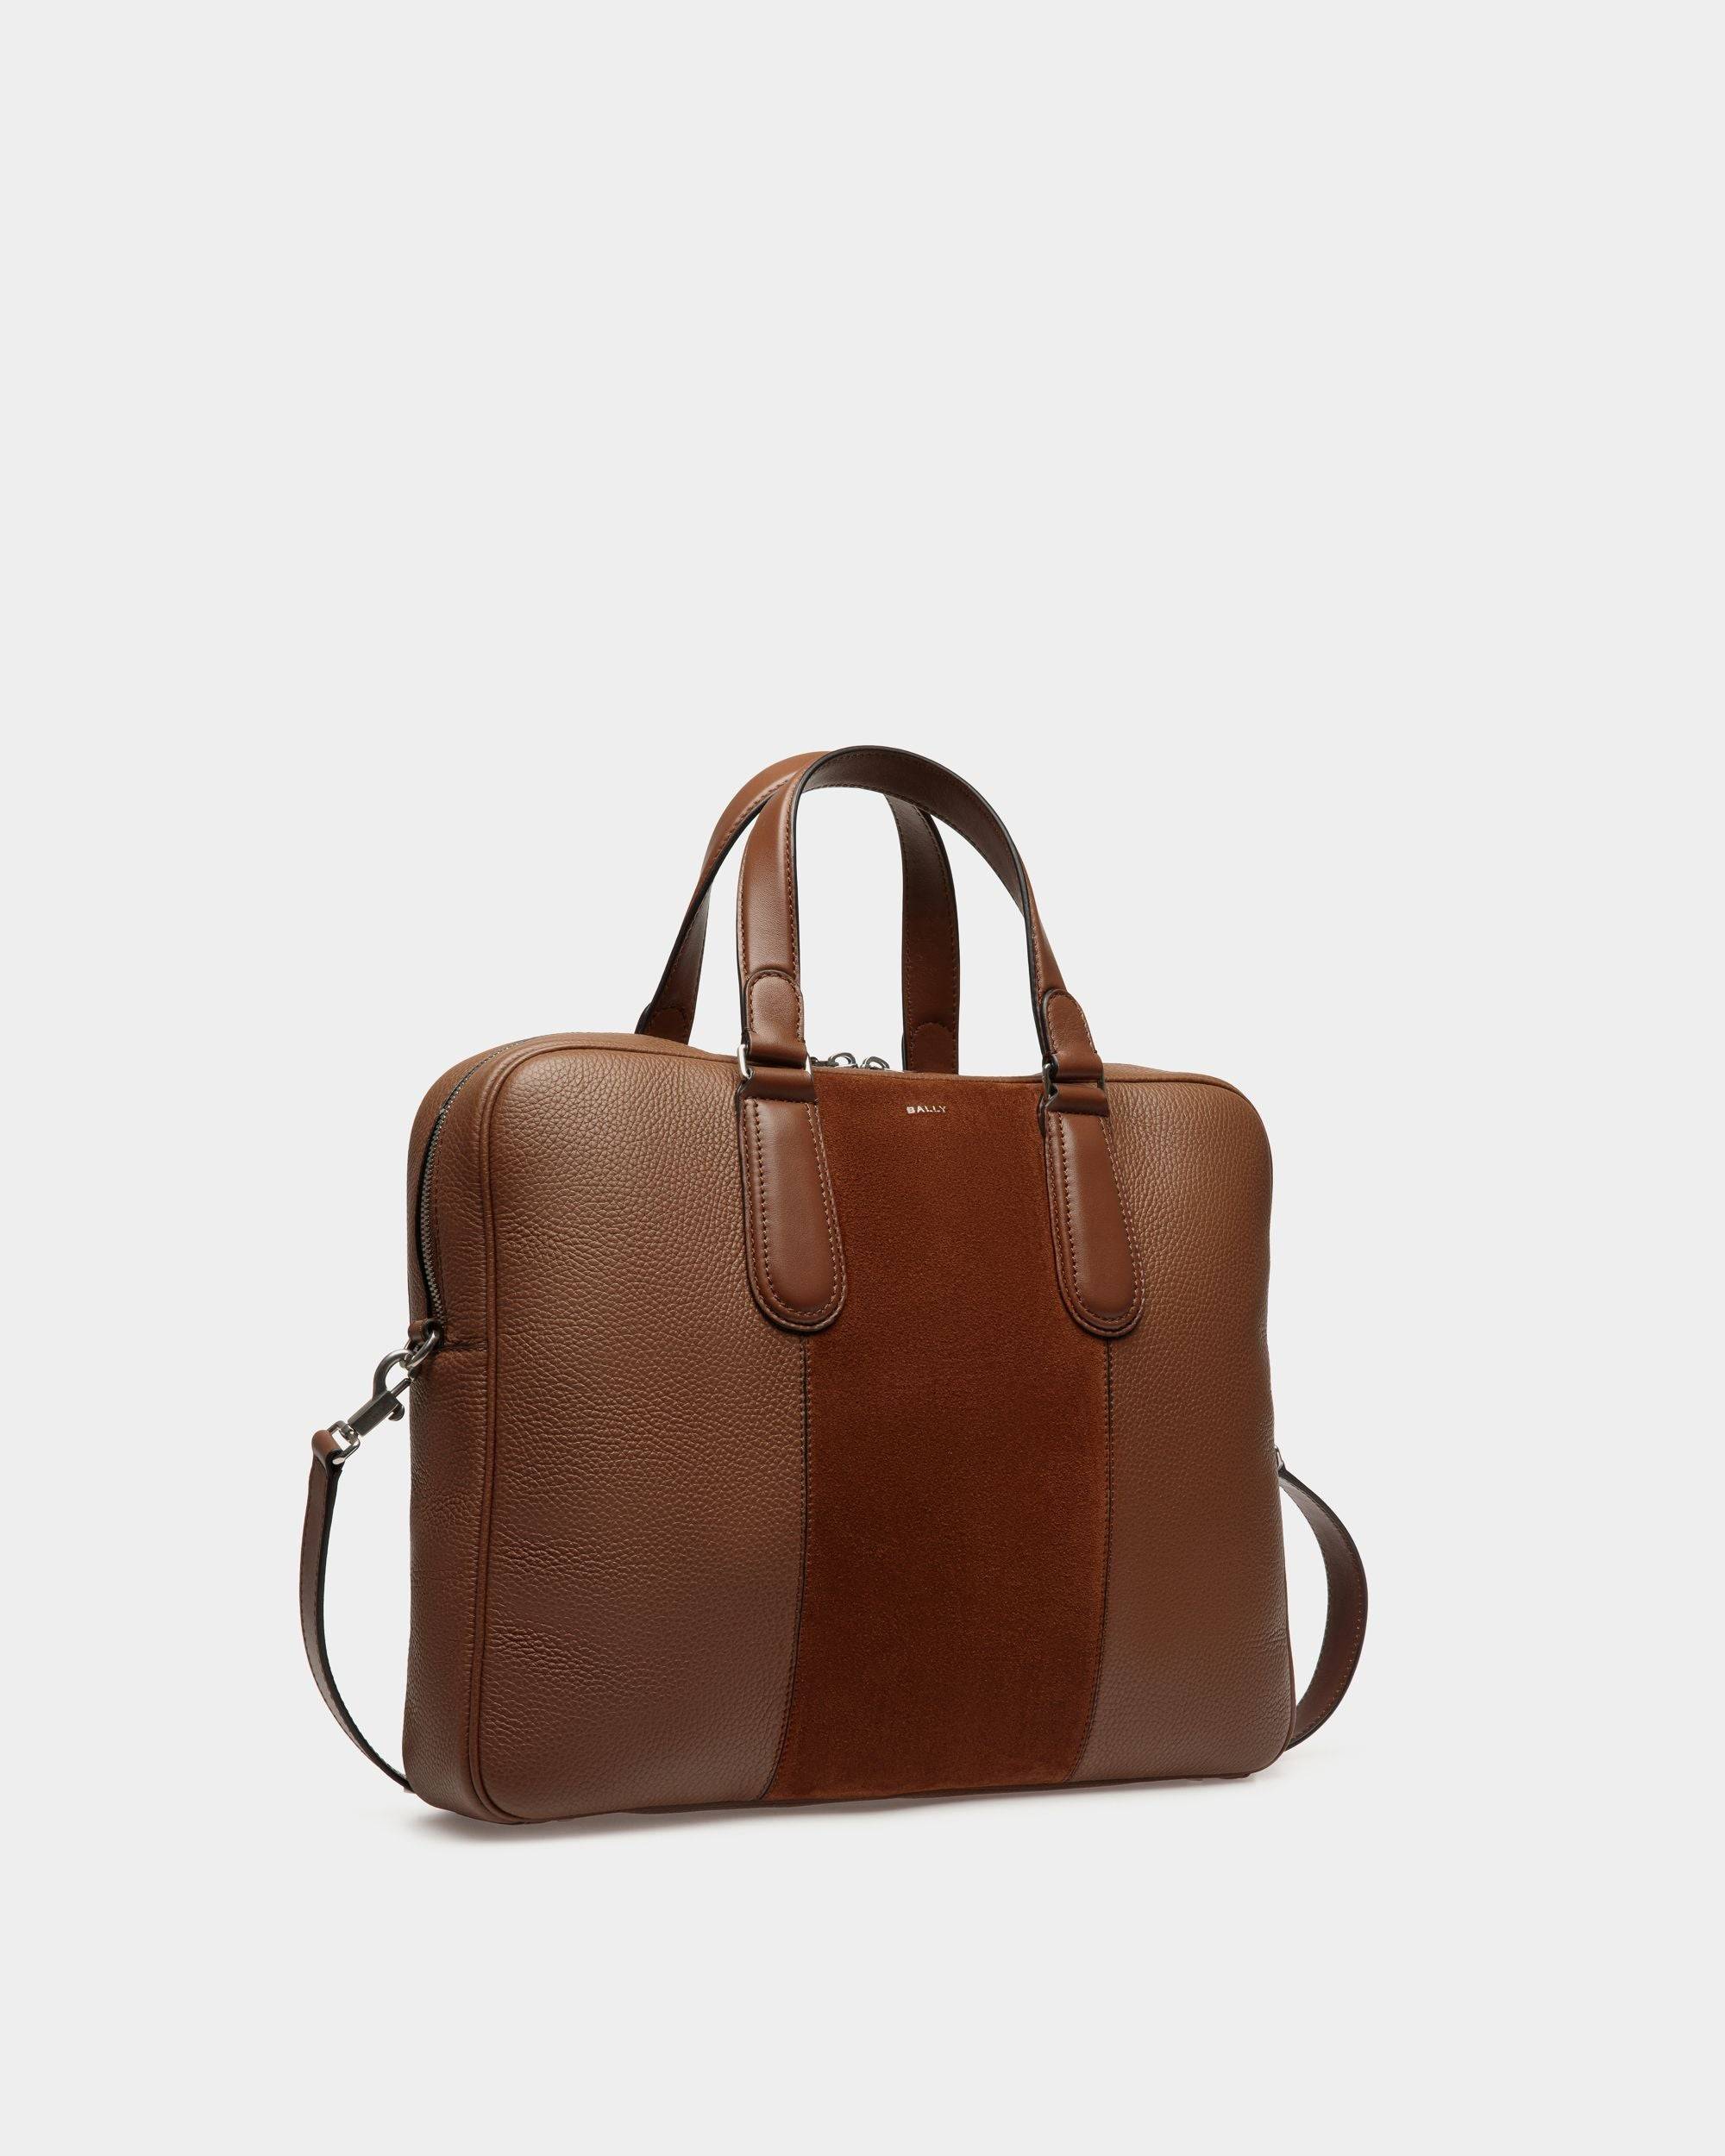 Spin | Men's Briefcase in Brown Leather | Bally | Still Life 3/4 Front